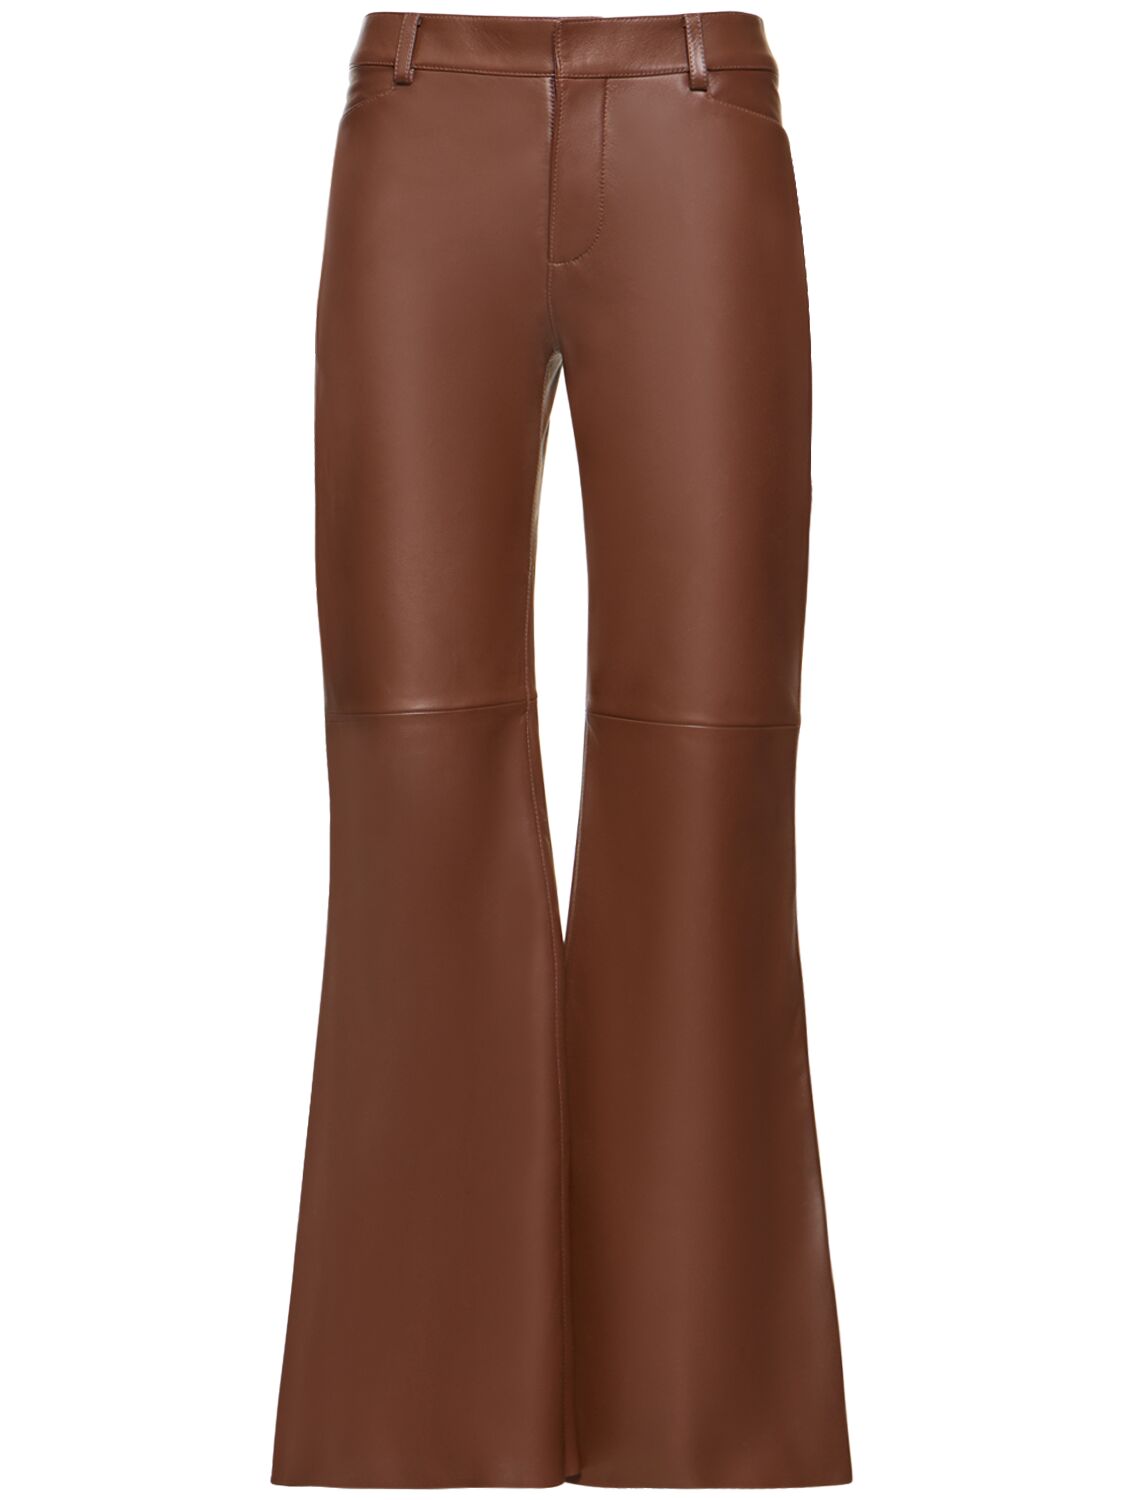 CHLOÉ Classic Nappa Leather Flared Pants